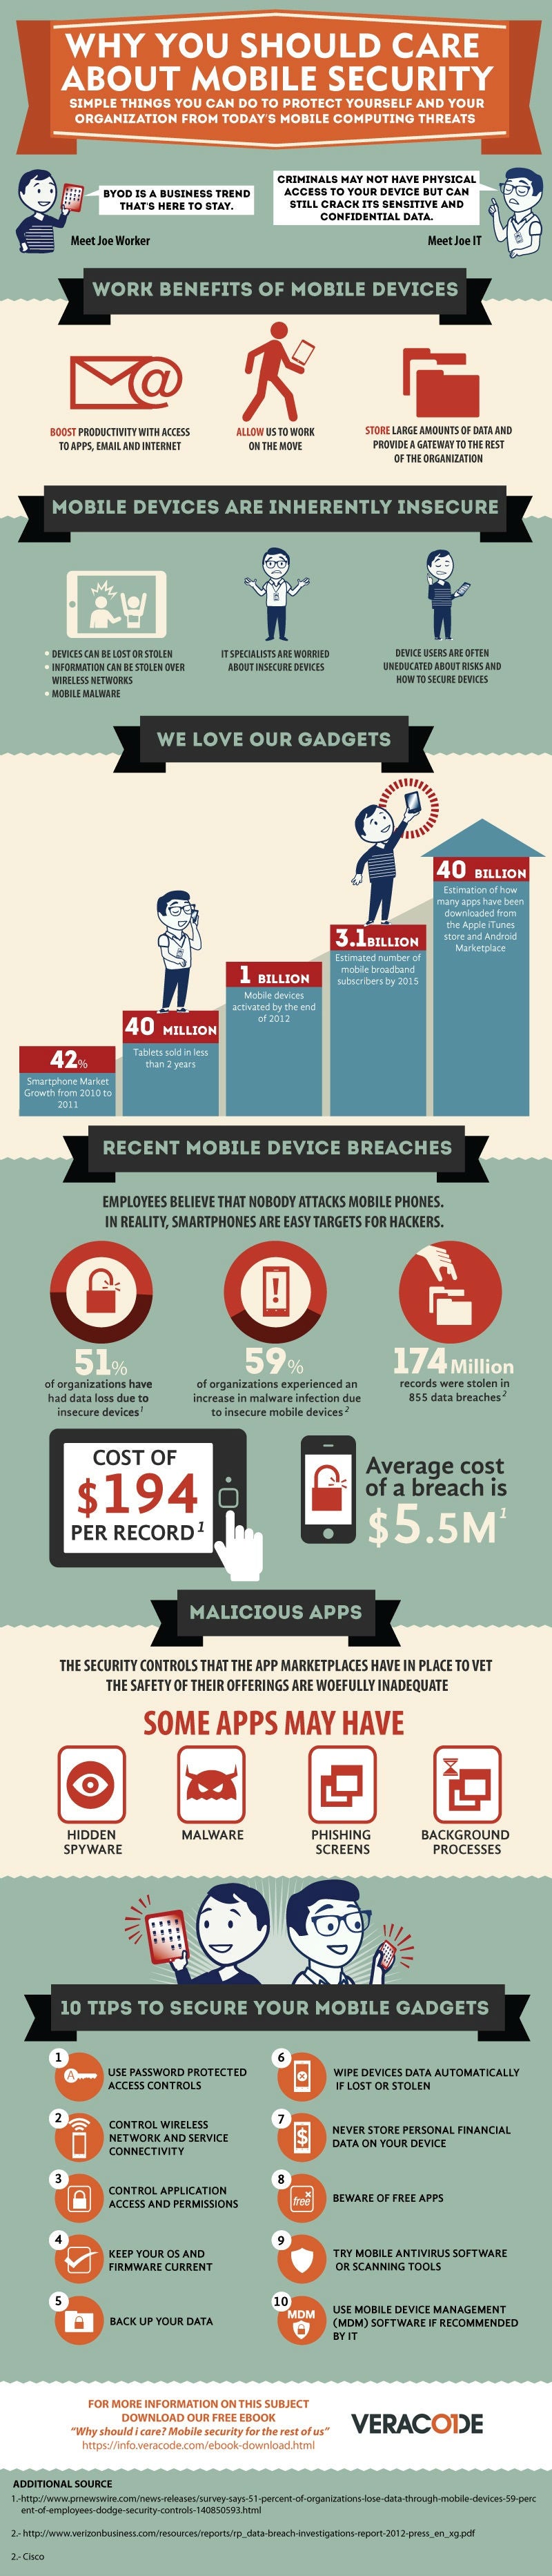 Infographic: Why mobile security matters